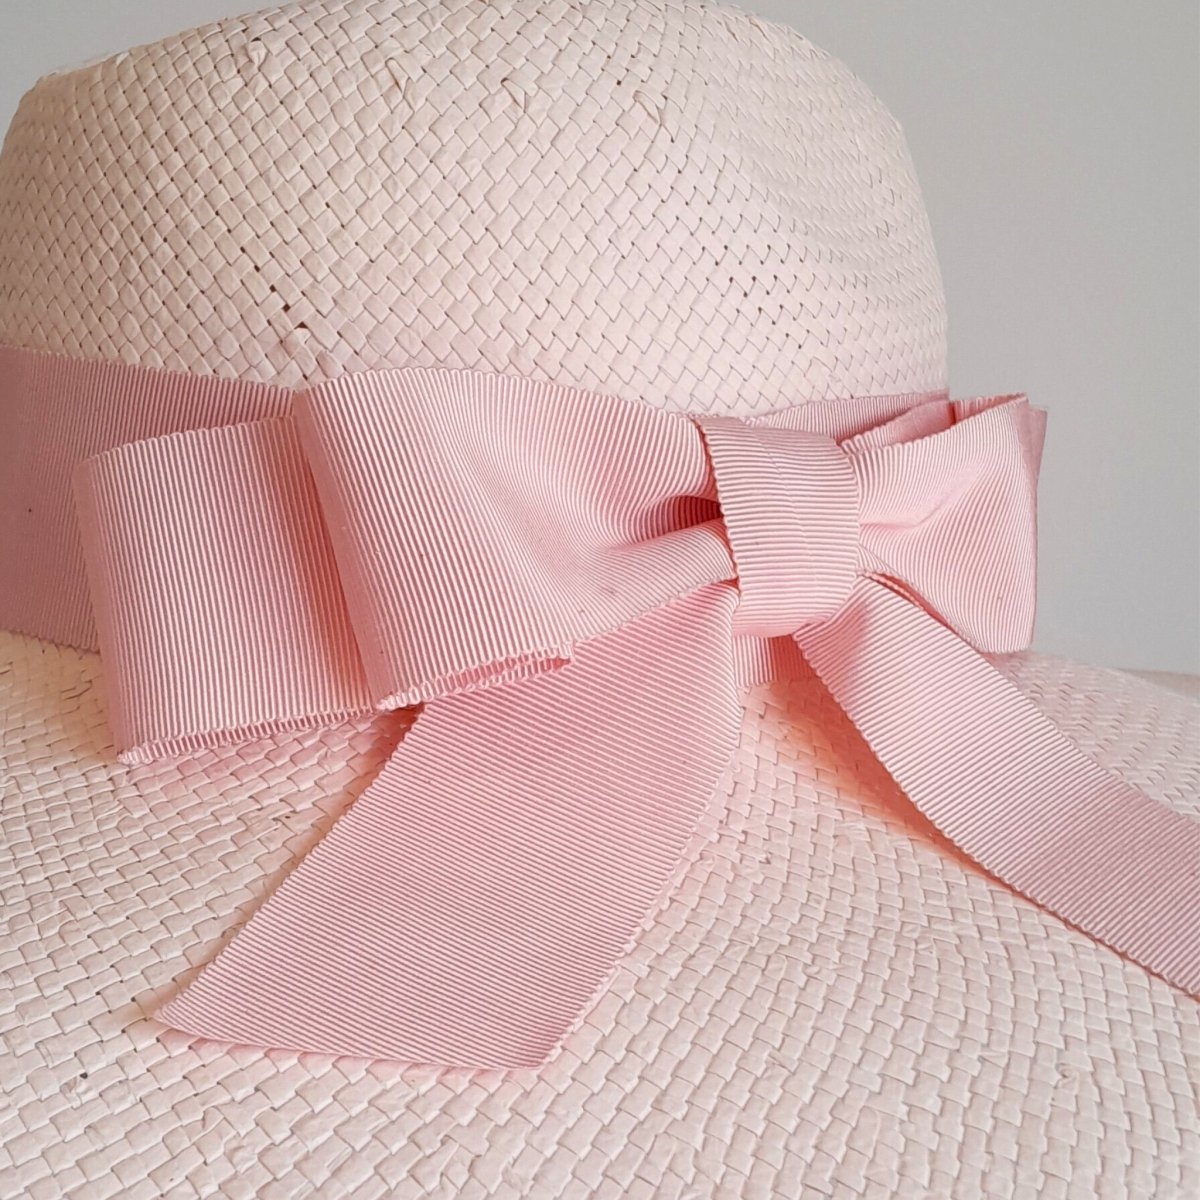 Pink straw wide fedora brim hat with double petersham ribbon bow - Julie Herbert Millinery